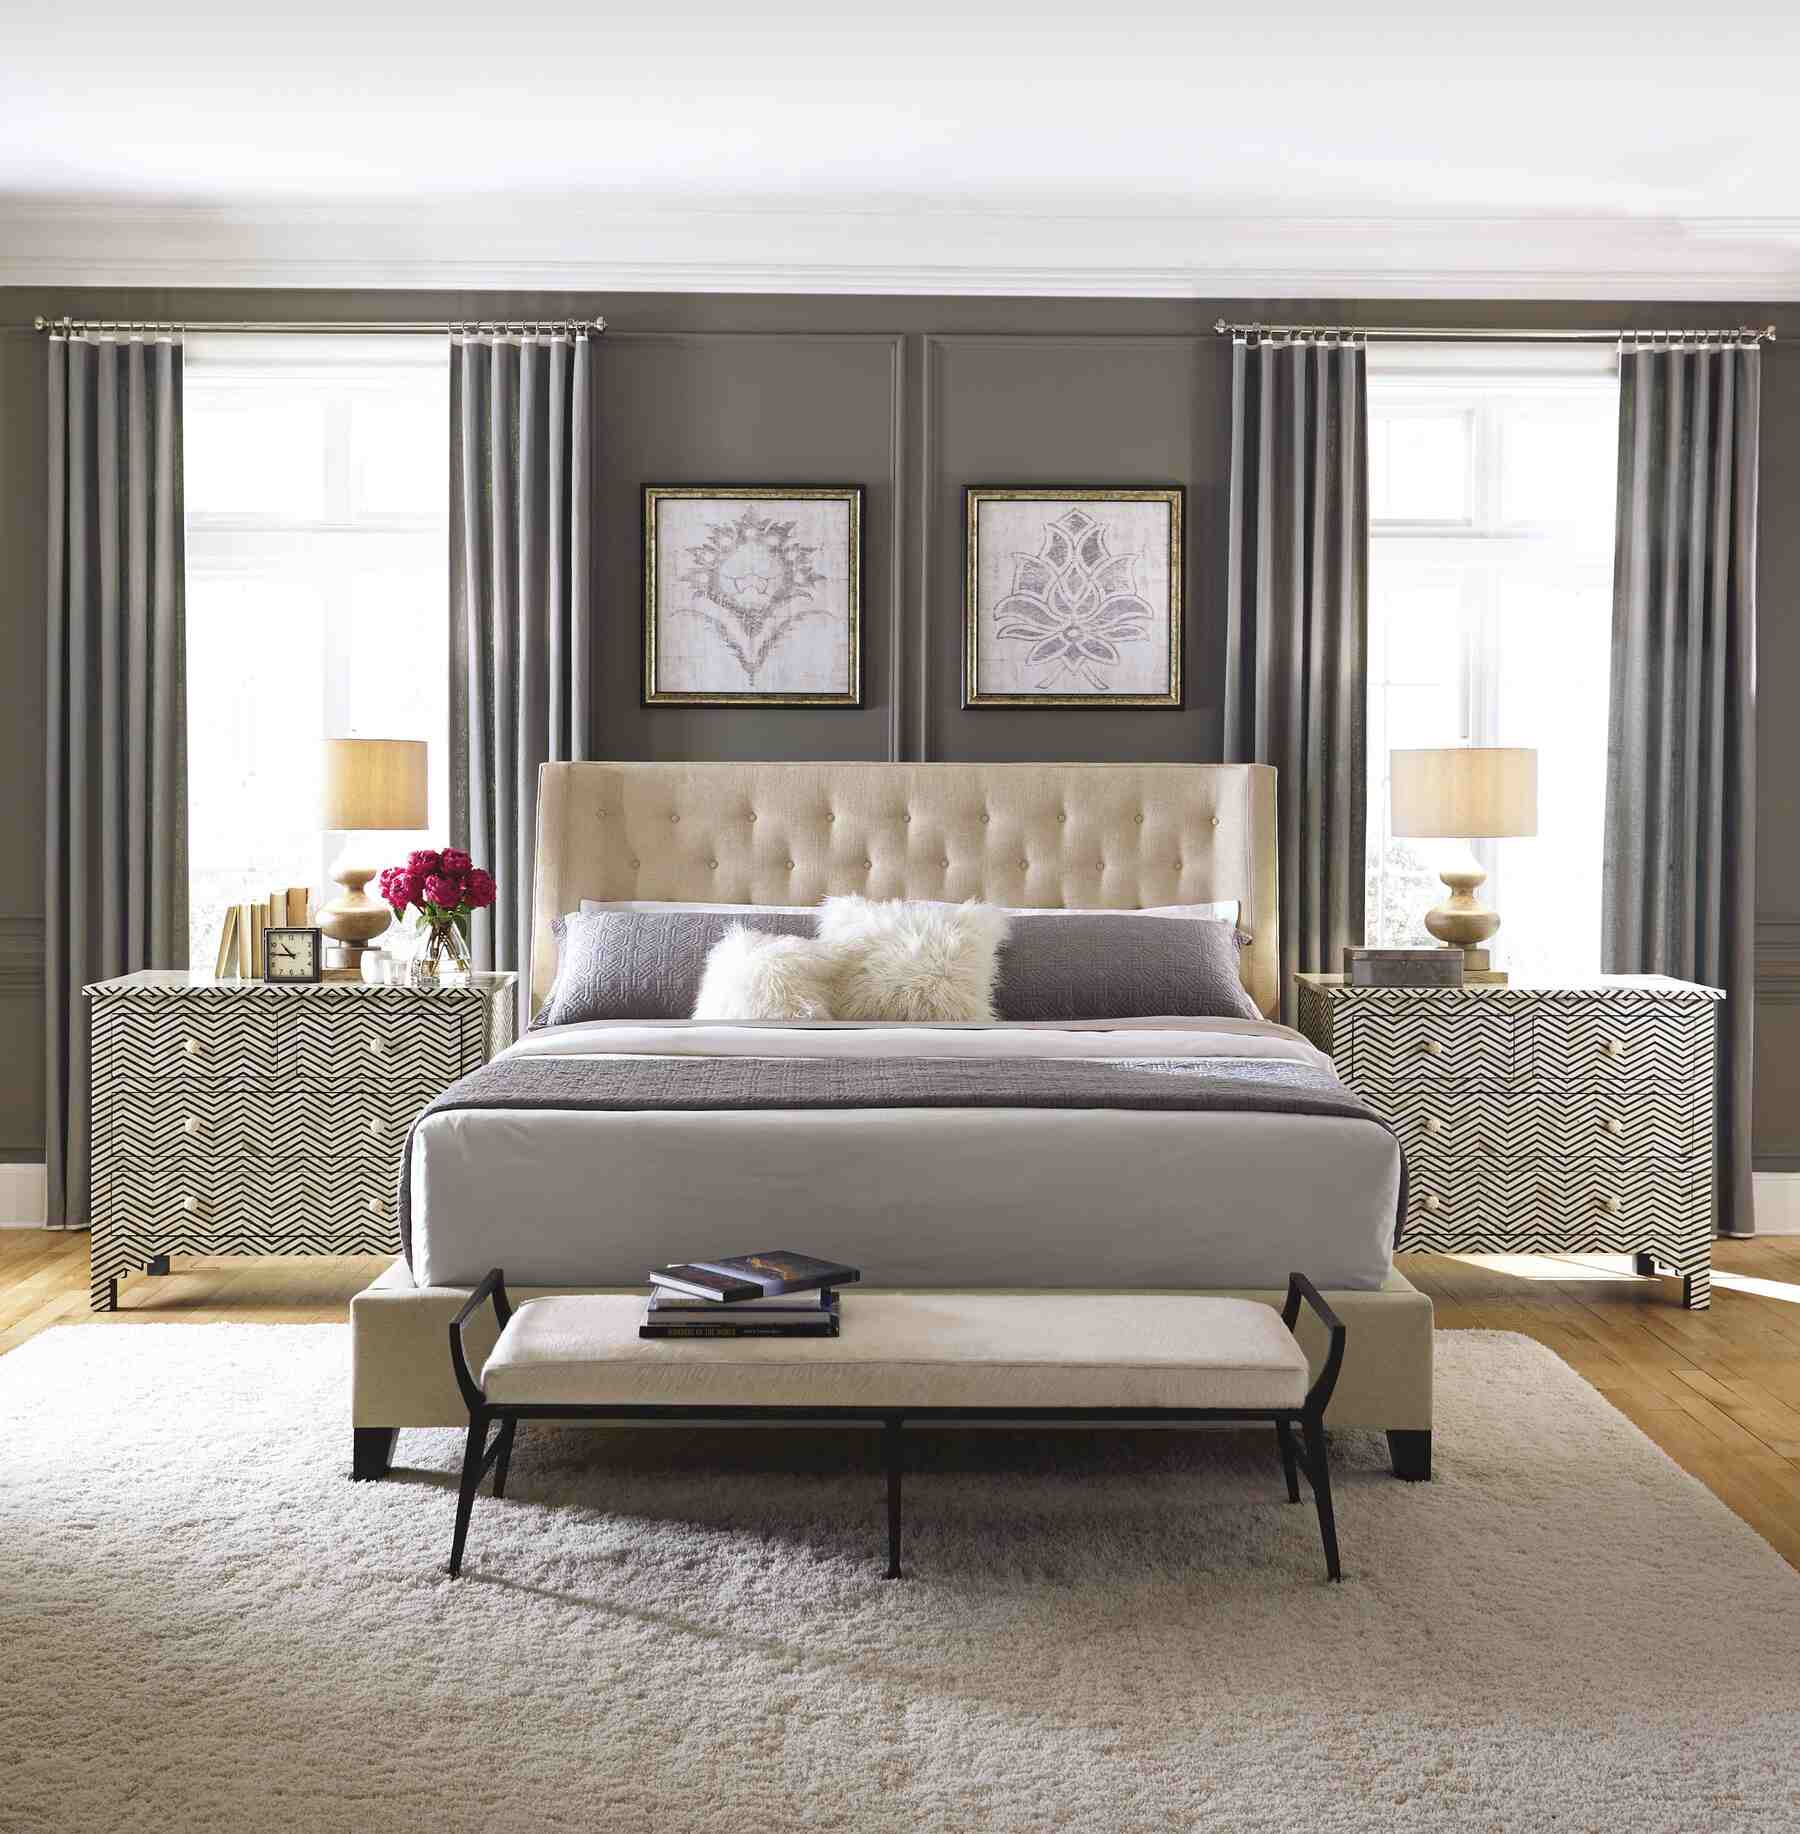 A cozy bedroom with a comfortable bed, stylish dressers, and elegant nightstands